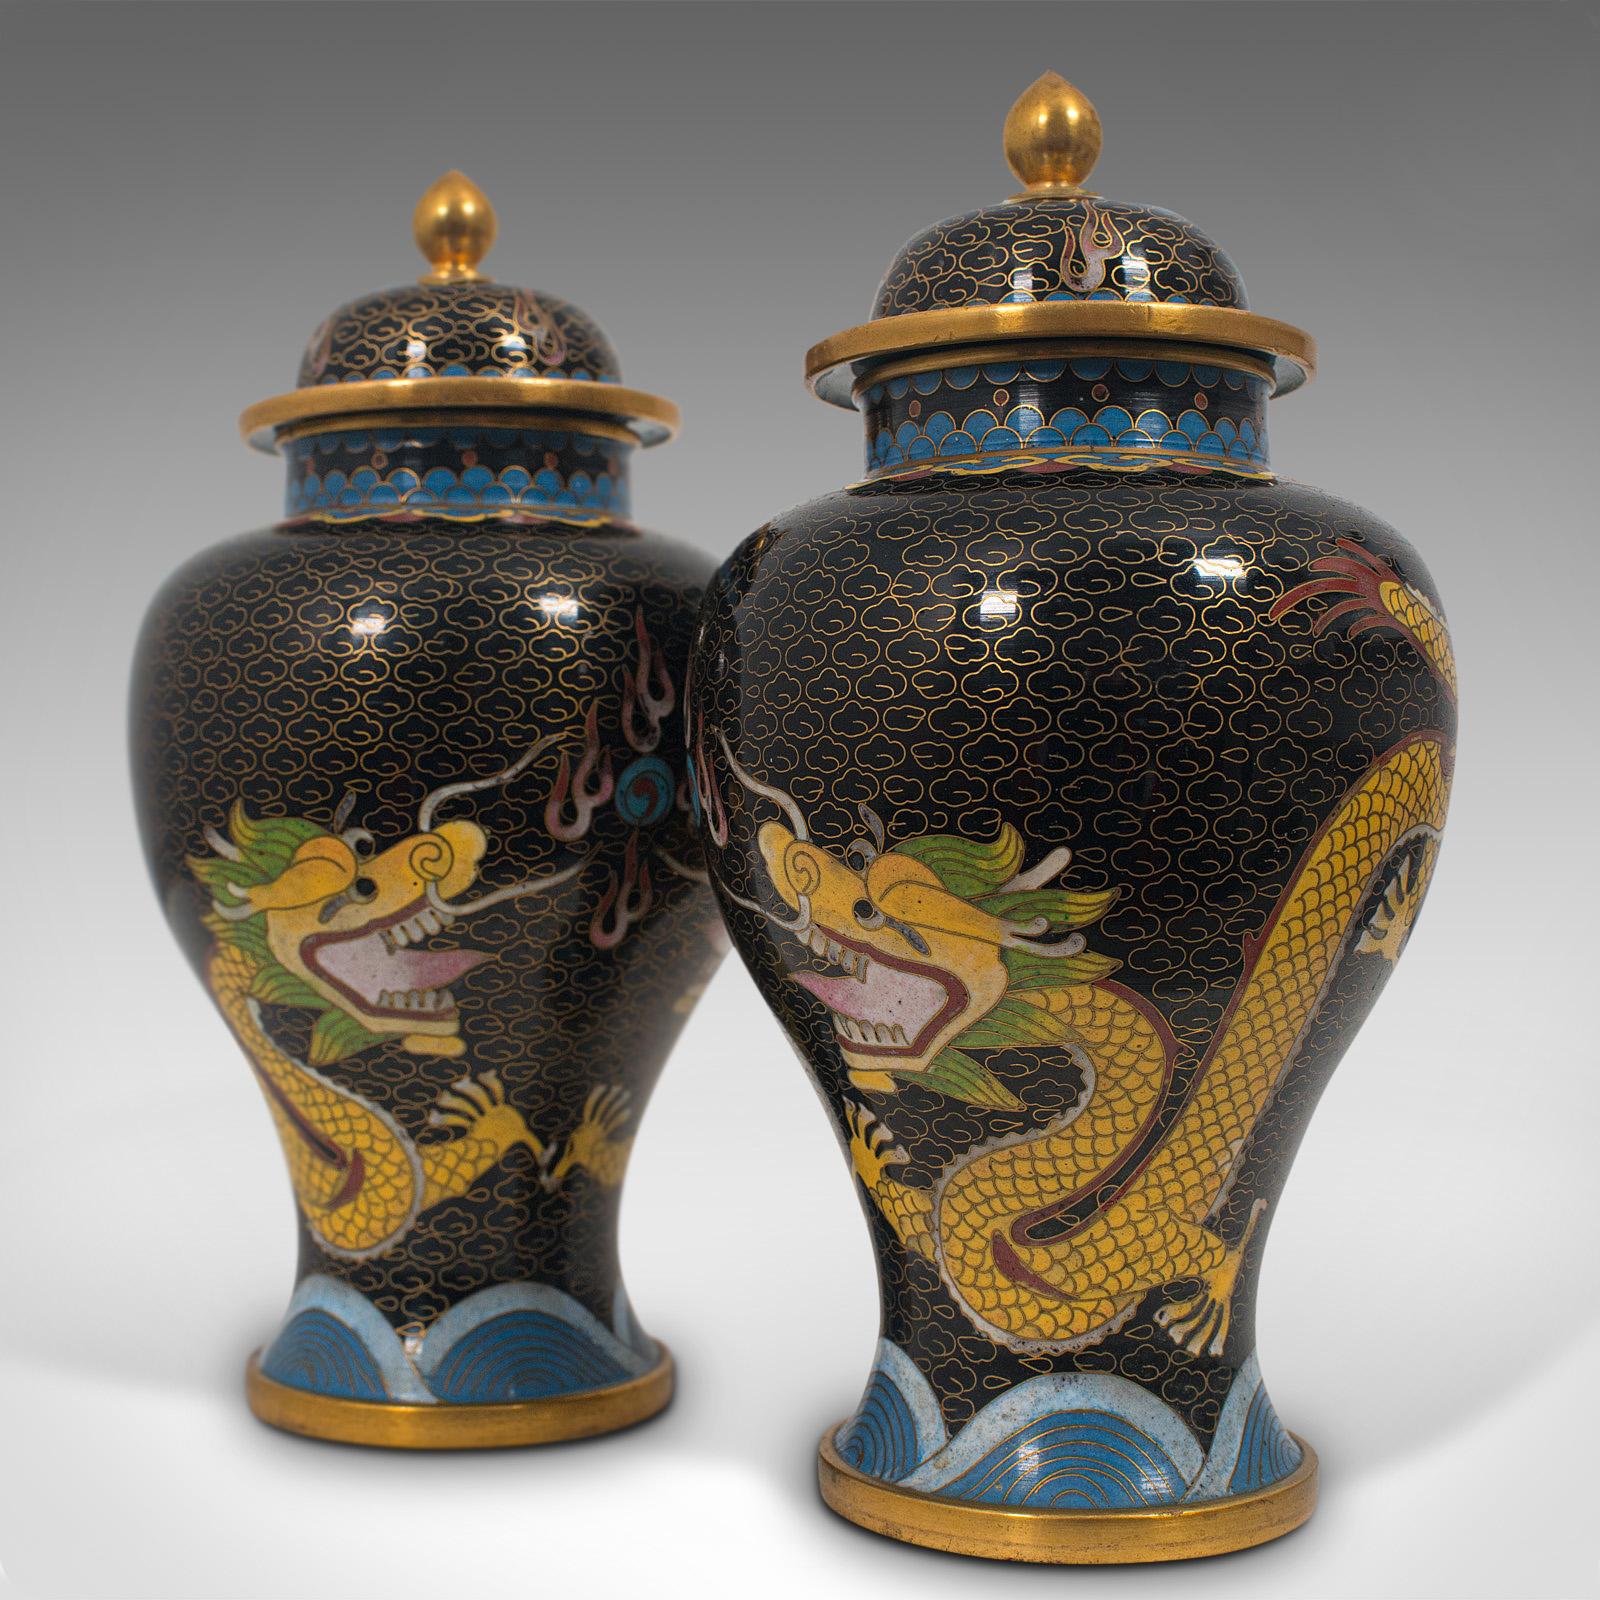 Antique Decorative Spice Jars, Chinese, Cloisonné, Baluster Urn circa 1900, Pair For Sale 4